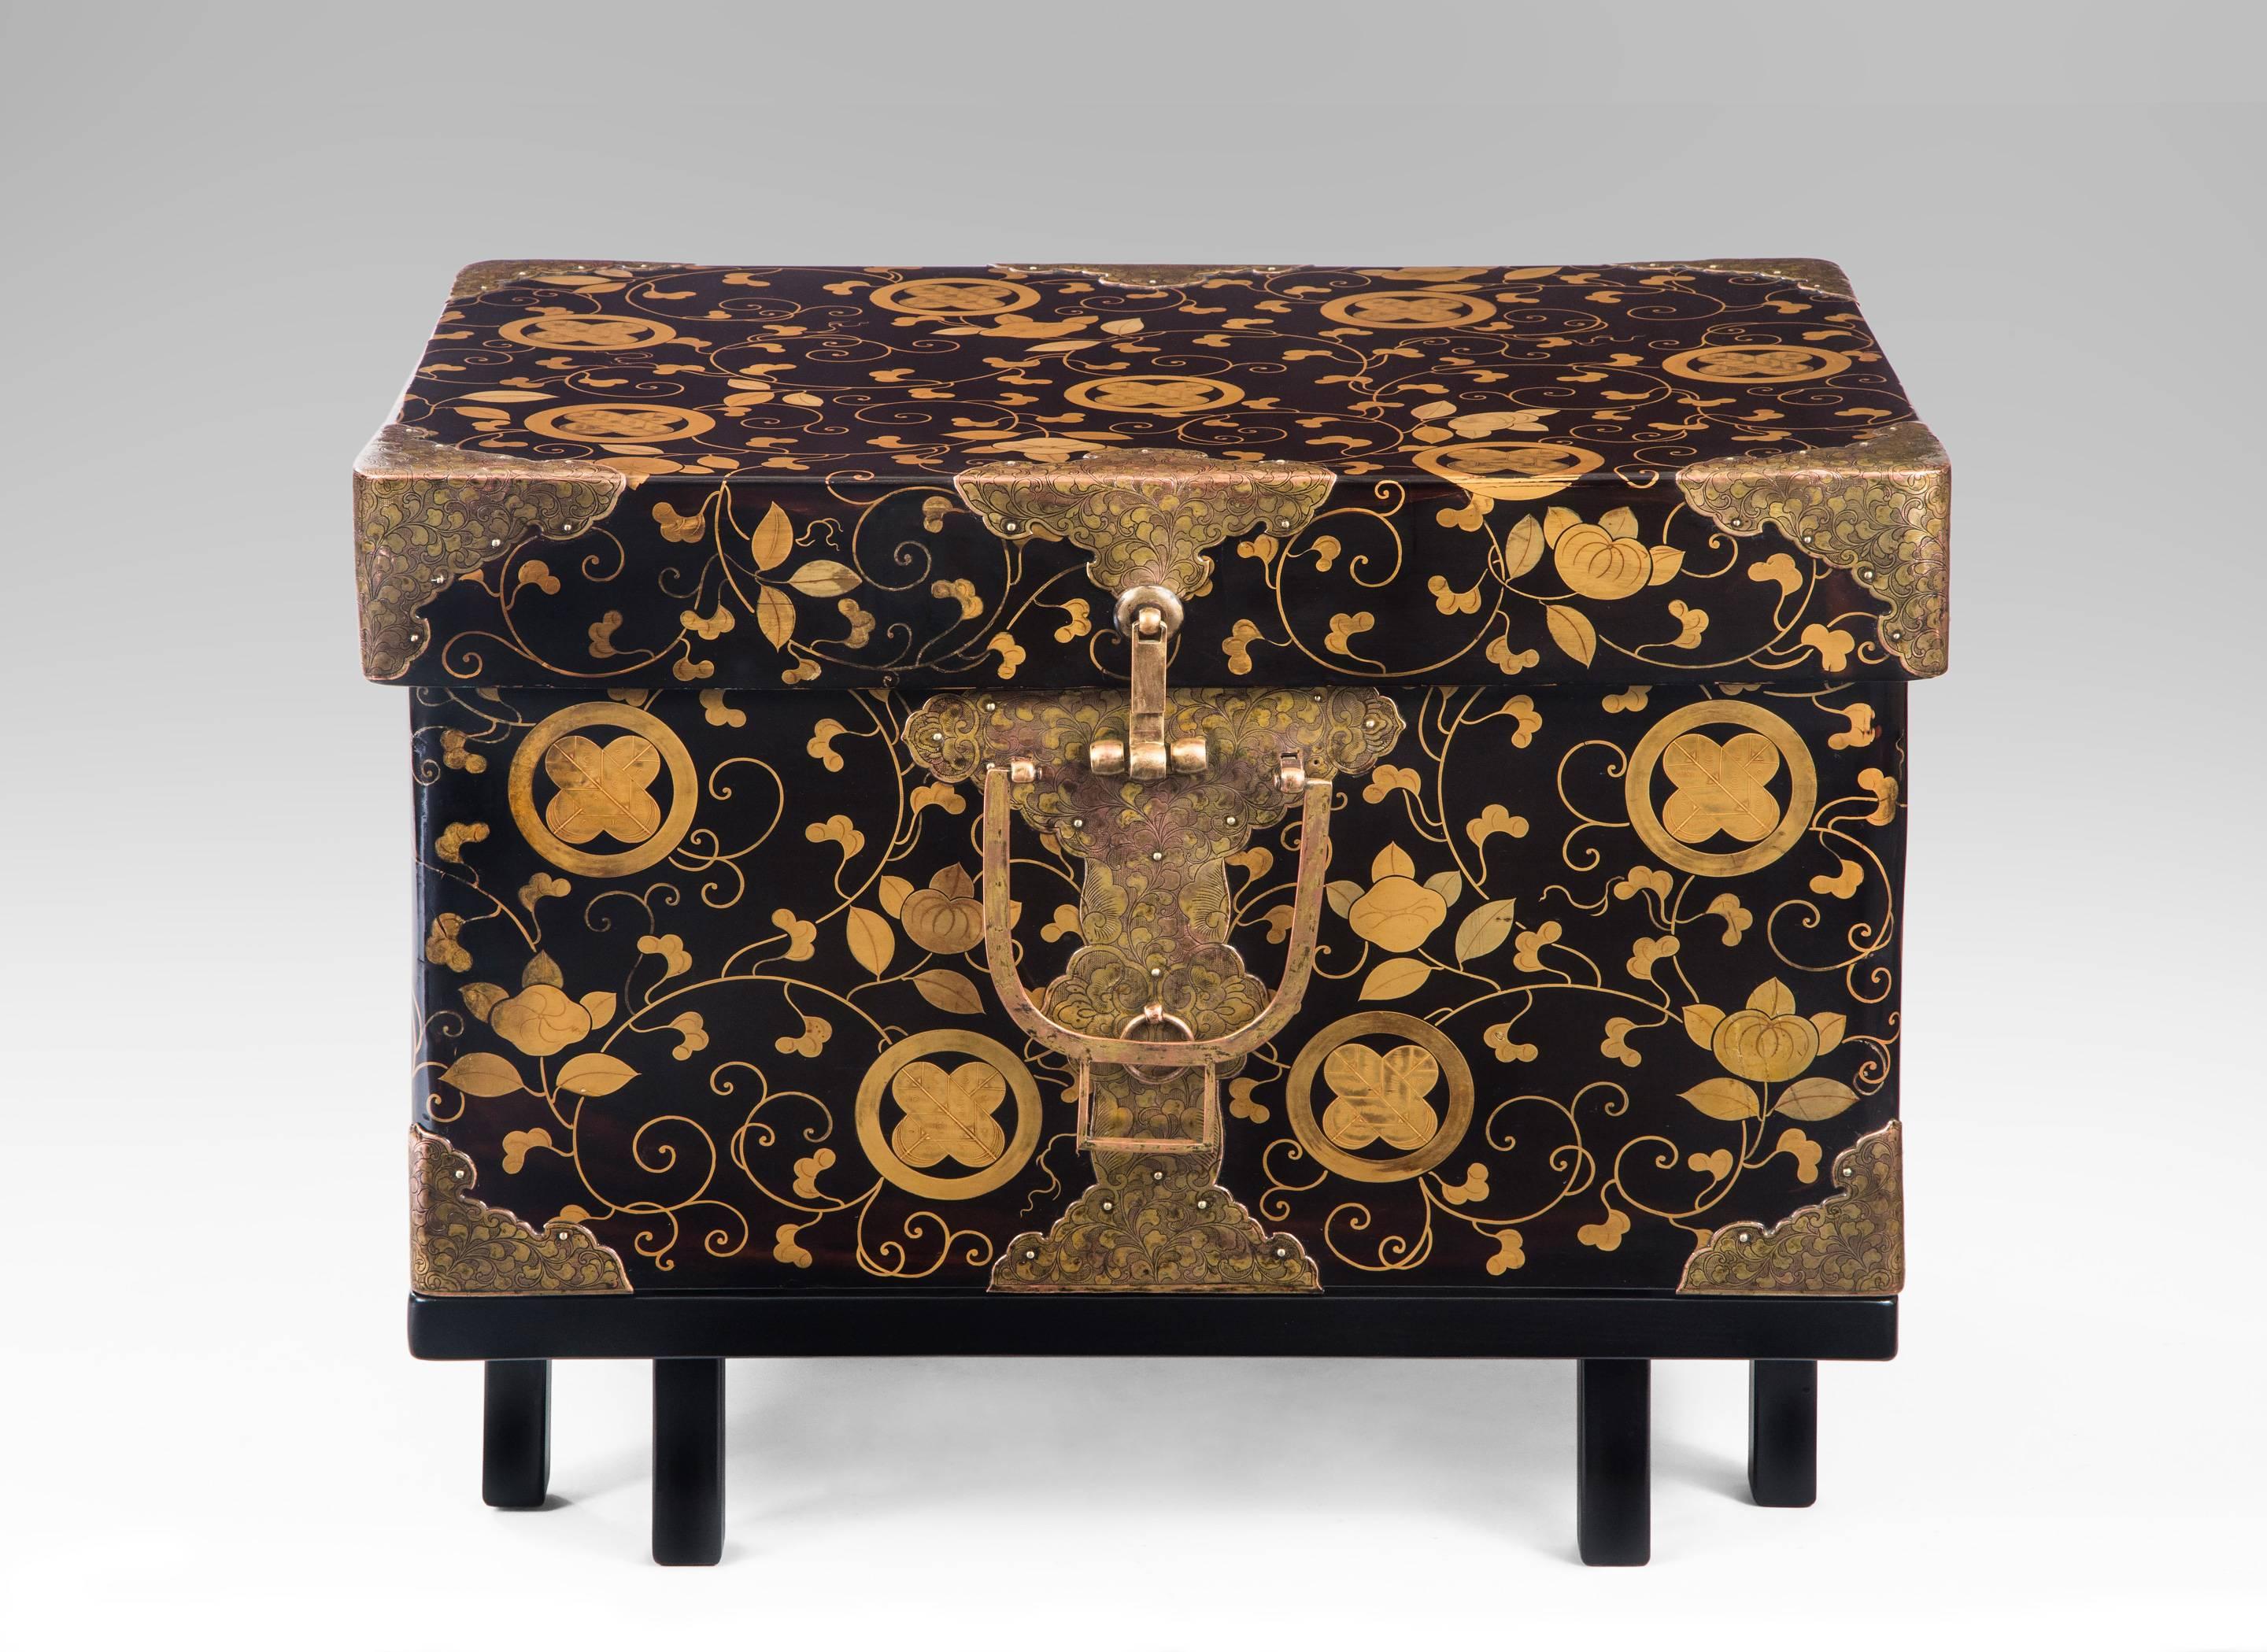 Japanese Gilt Metal Mounted and Lacquer Hasami-Bako (Robe Chest / Box) For Sale 1